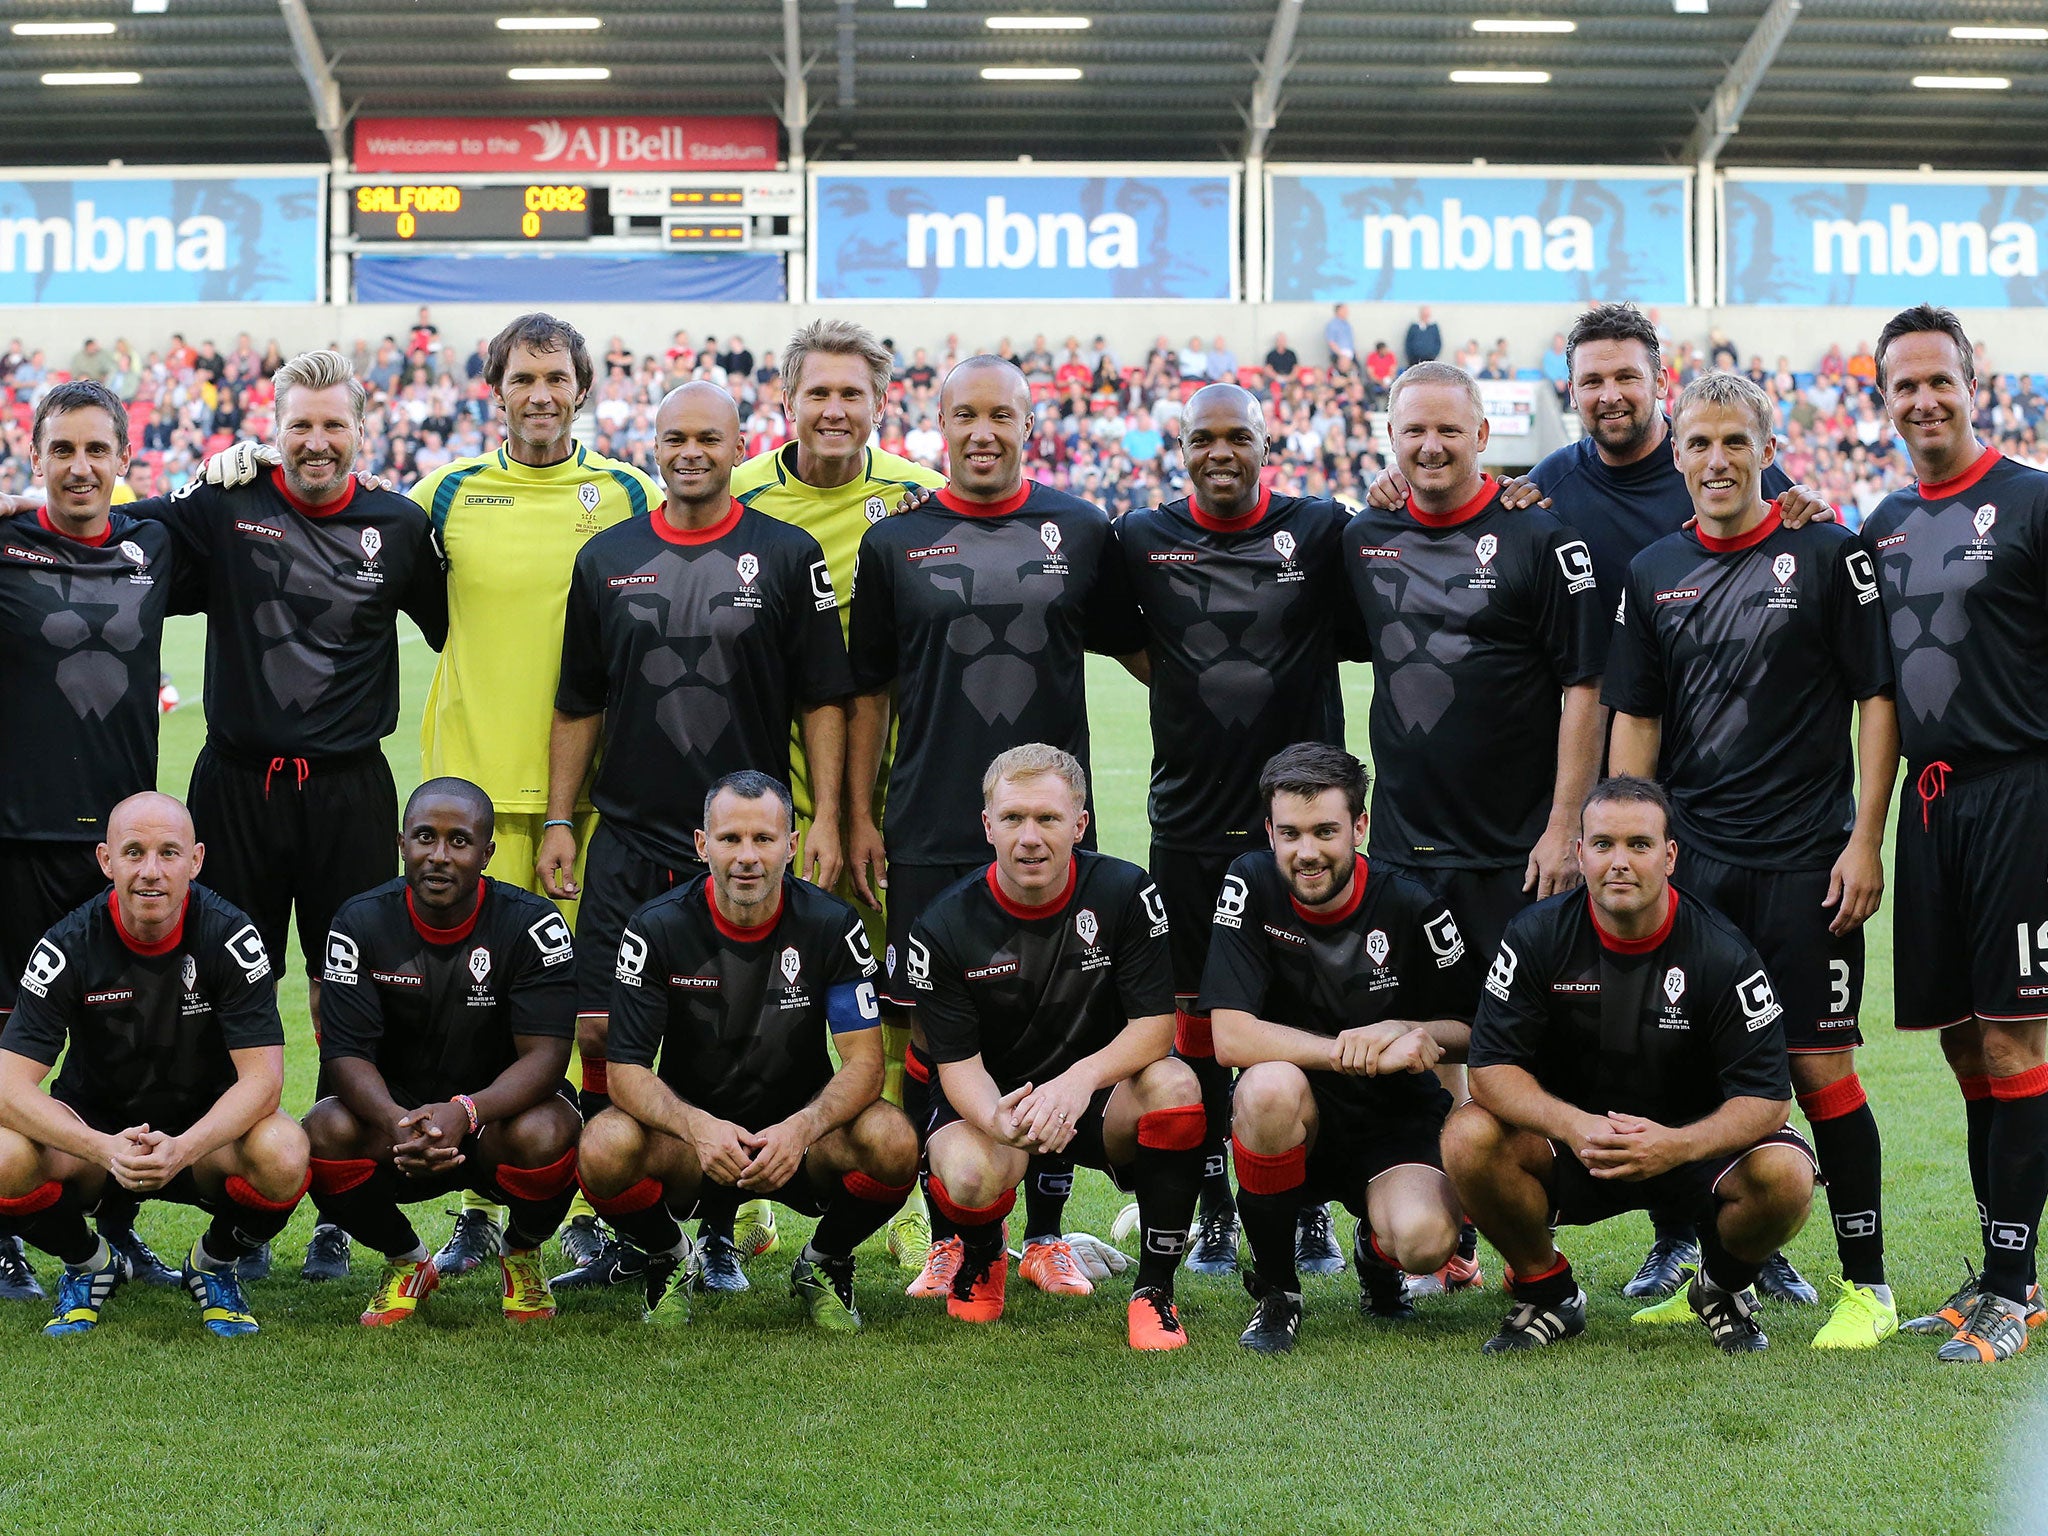 The Class of 92 - including Paul Scholes, Ryan Giggs, Nicky Butt and the Nevilles - played a friendly against non-league side Salford City FC